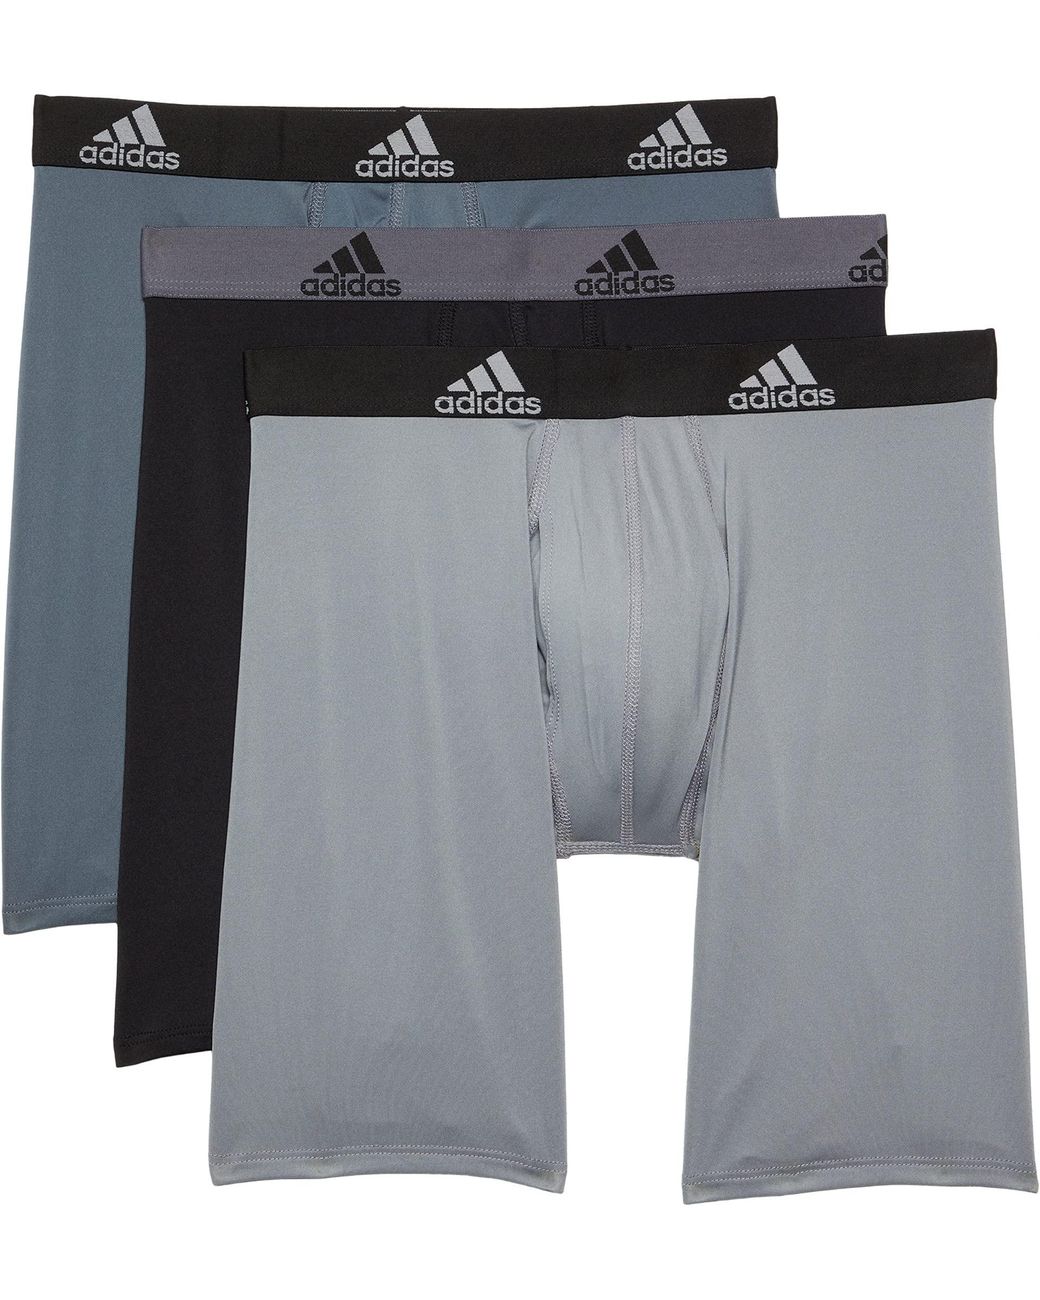 adidas Synthetic Performance Long Boxer Brief Underwear 3-pack for Men ...